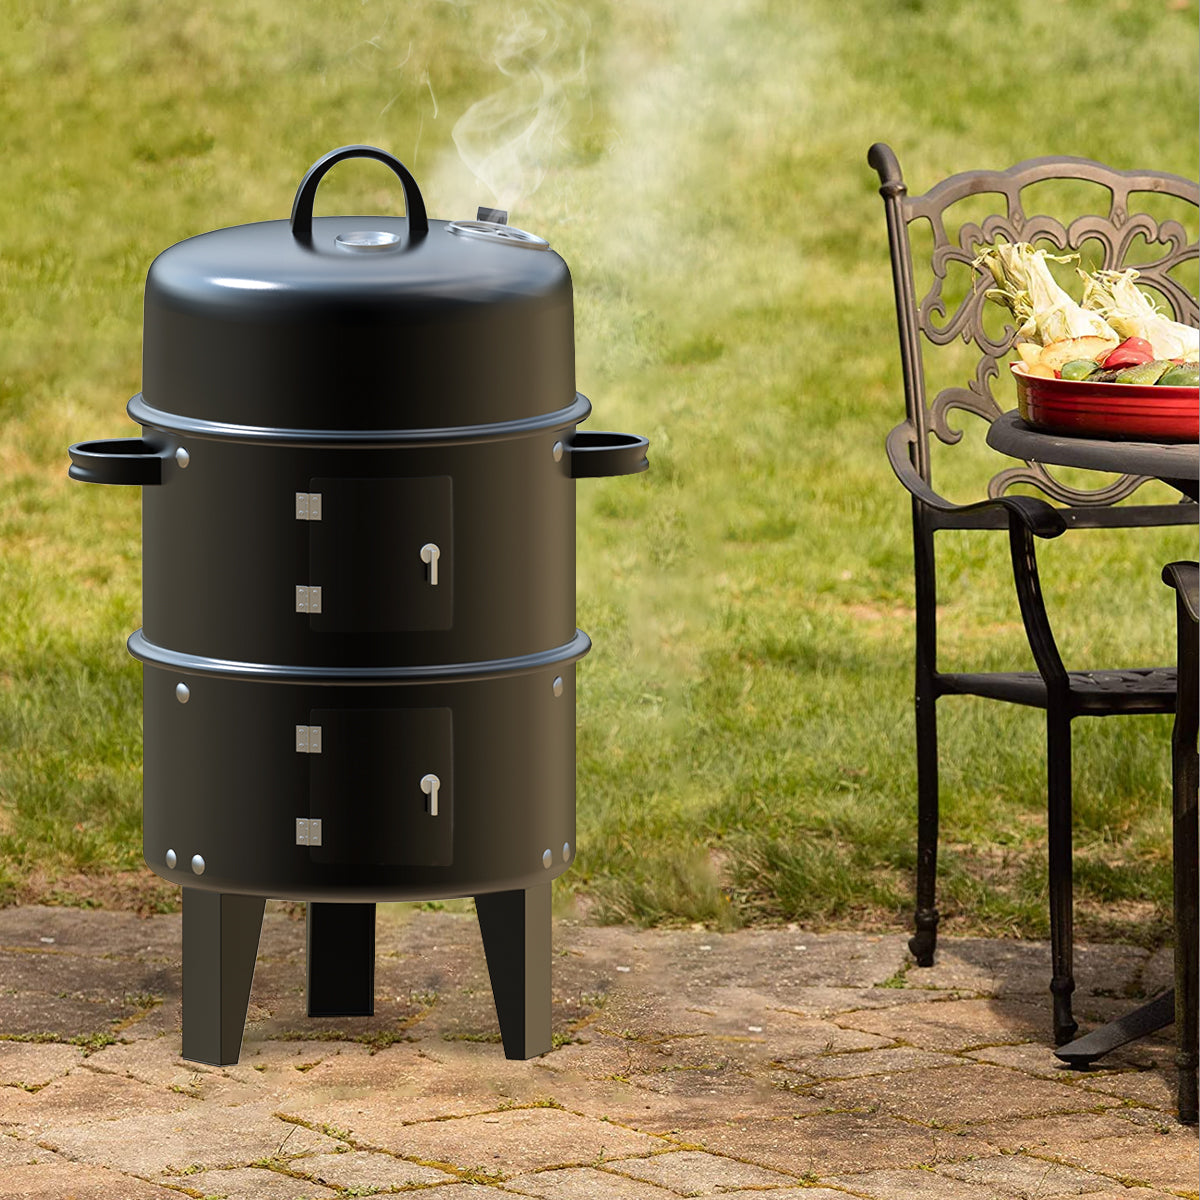 BBQ Hitow Grill inch Vertical 33 Charcoal – Smoker hitowofficial Steel